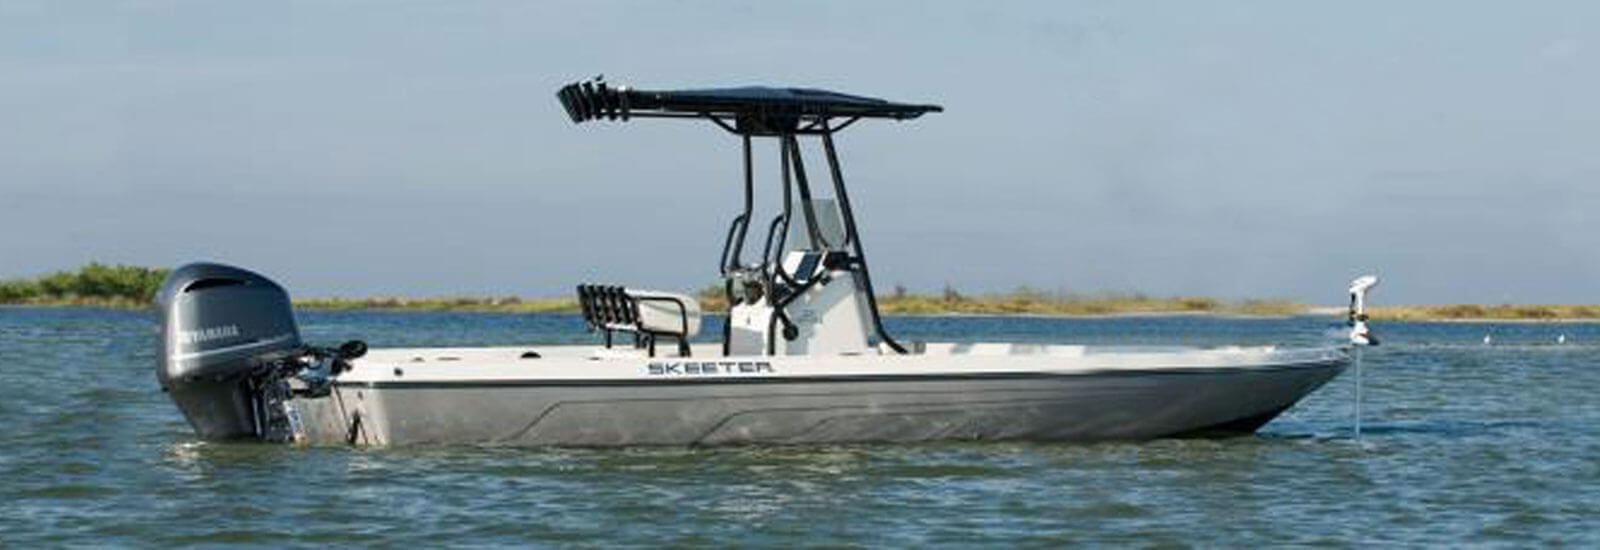 Fin and Fly Fishing Charters - Skeeter 24ft